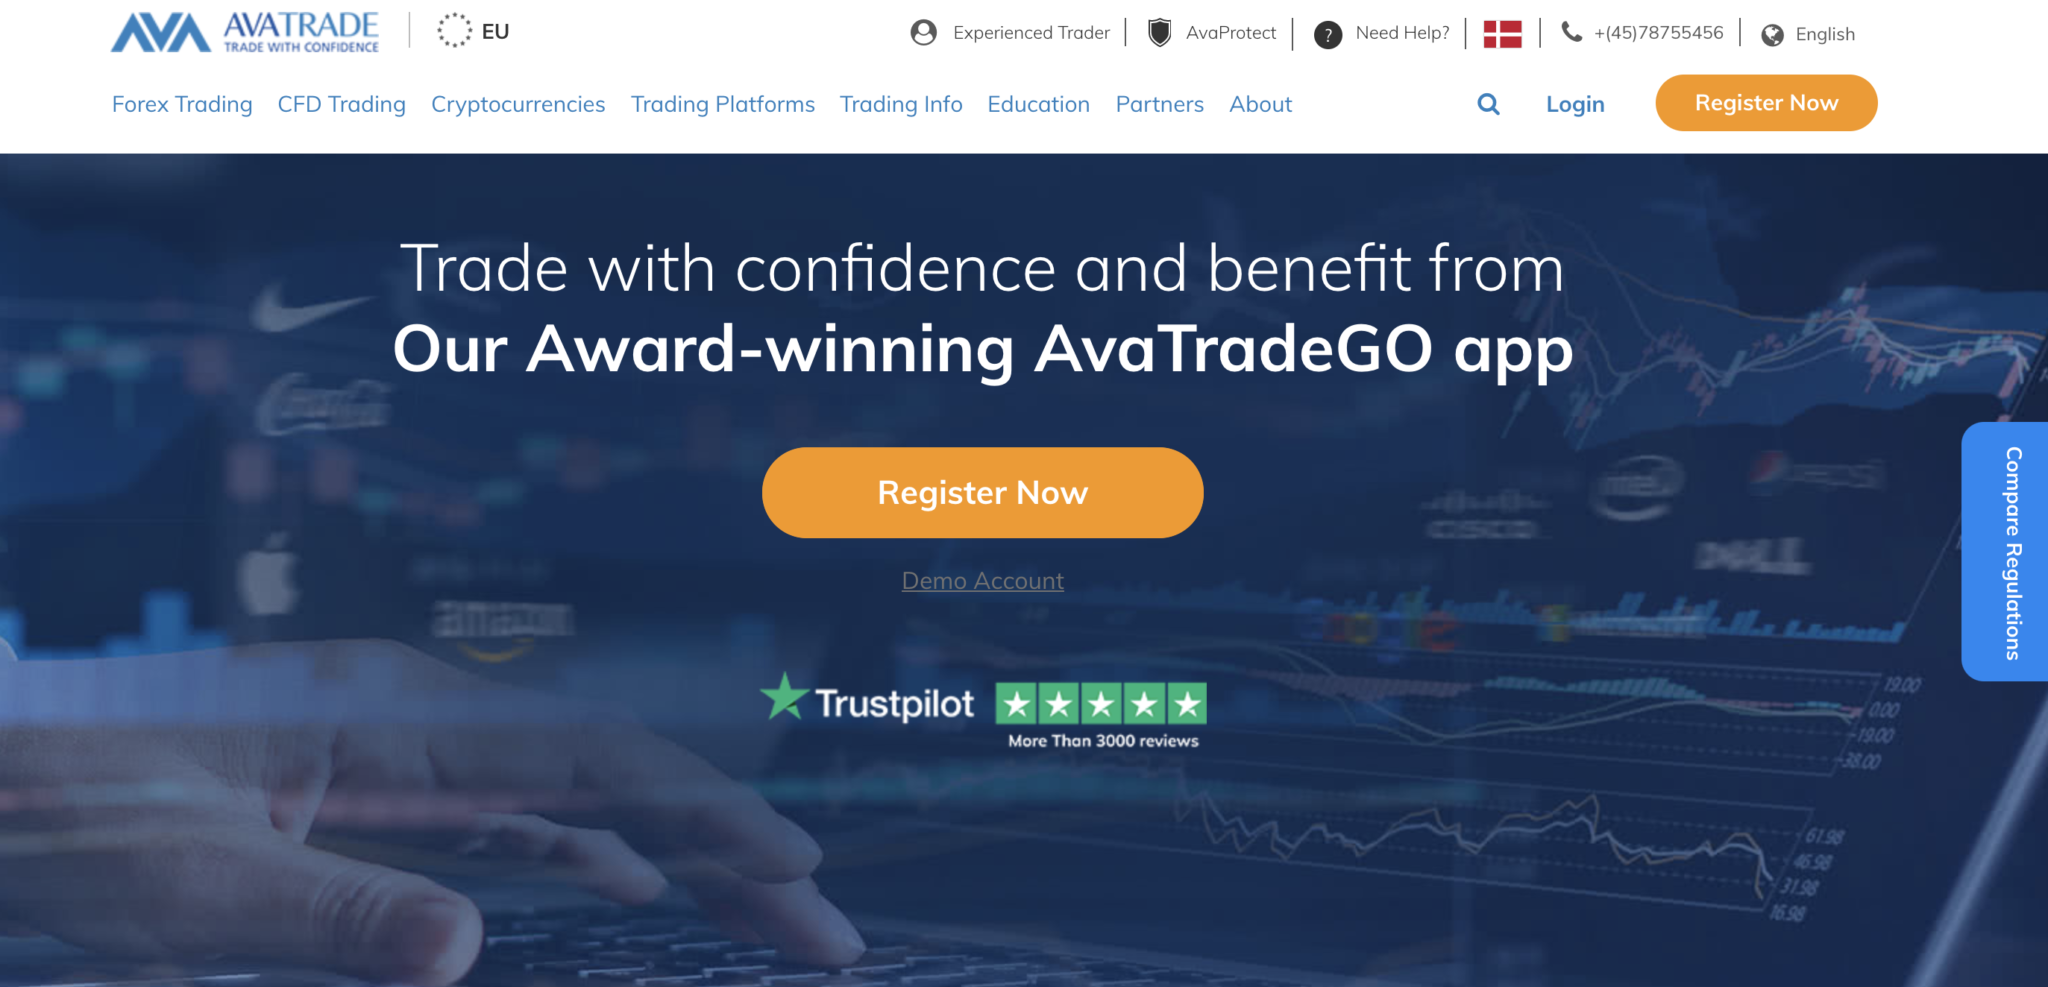 Which Online Trading Platform Is Best In Singapore?